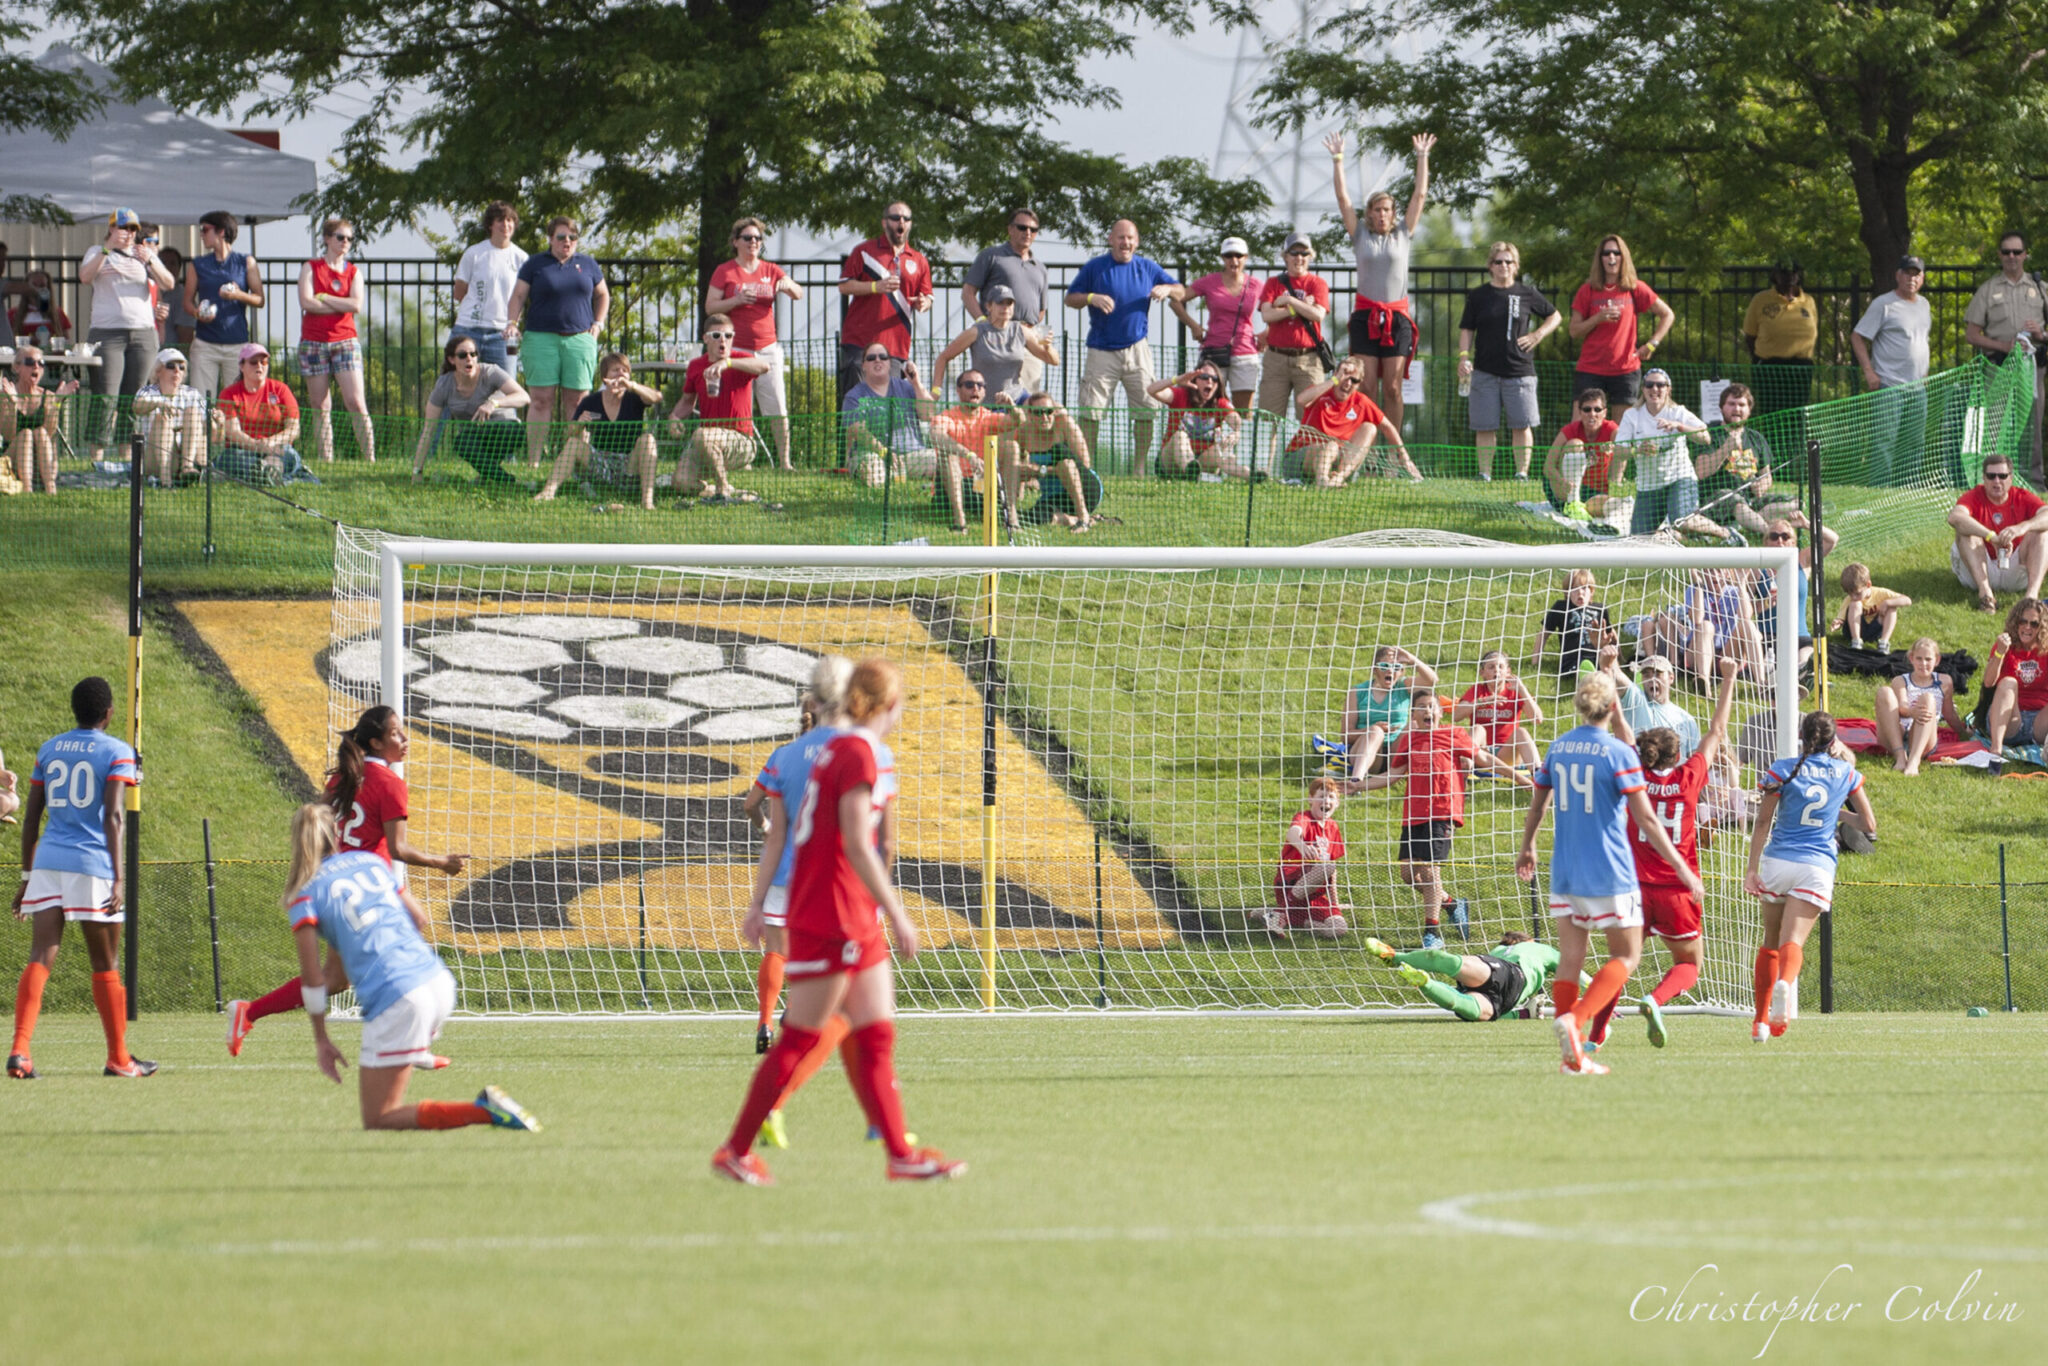 Nairn’s goal lifts Spirit past Dash 3-2 Featured Image